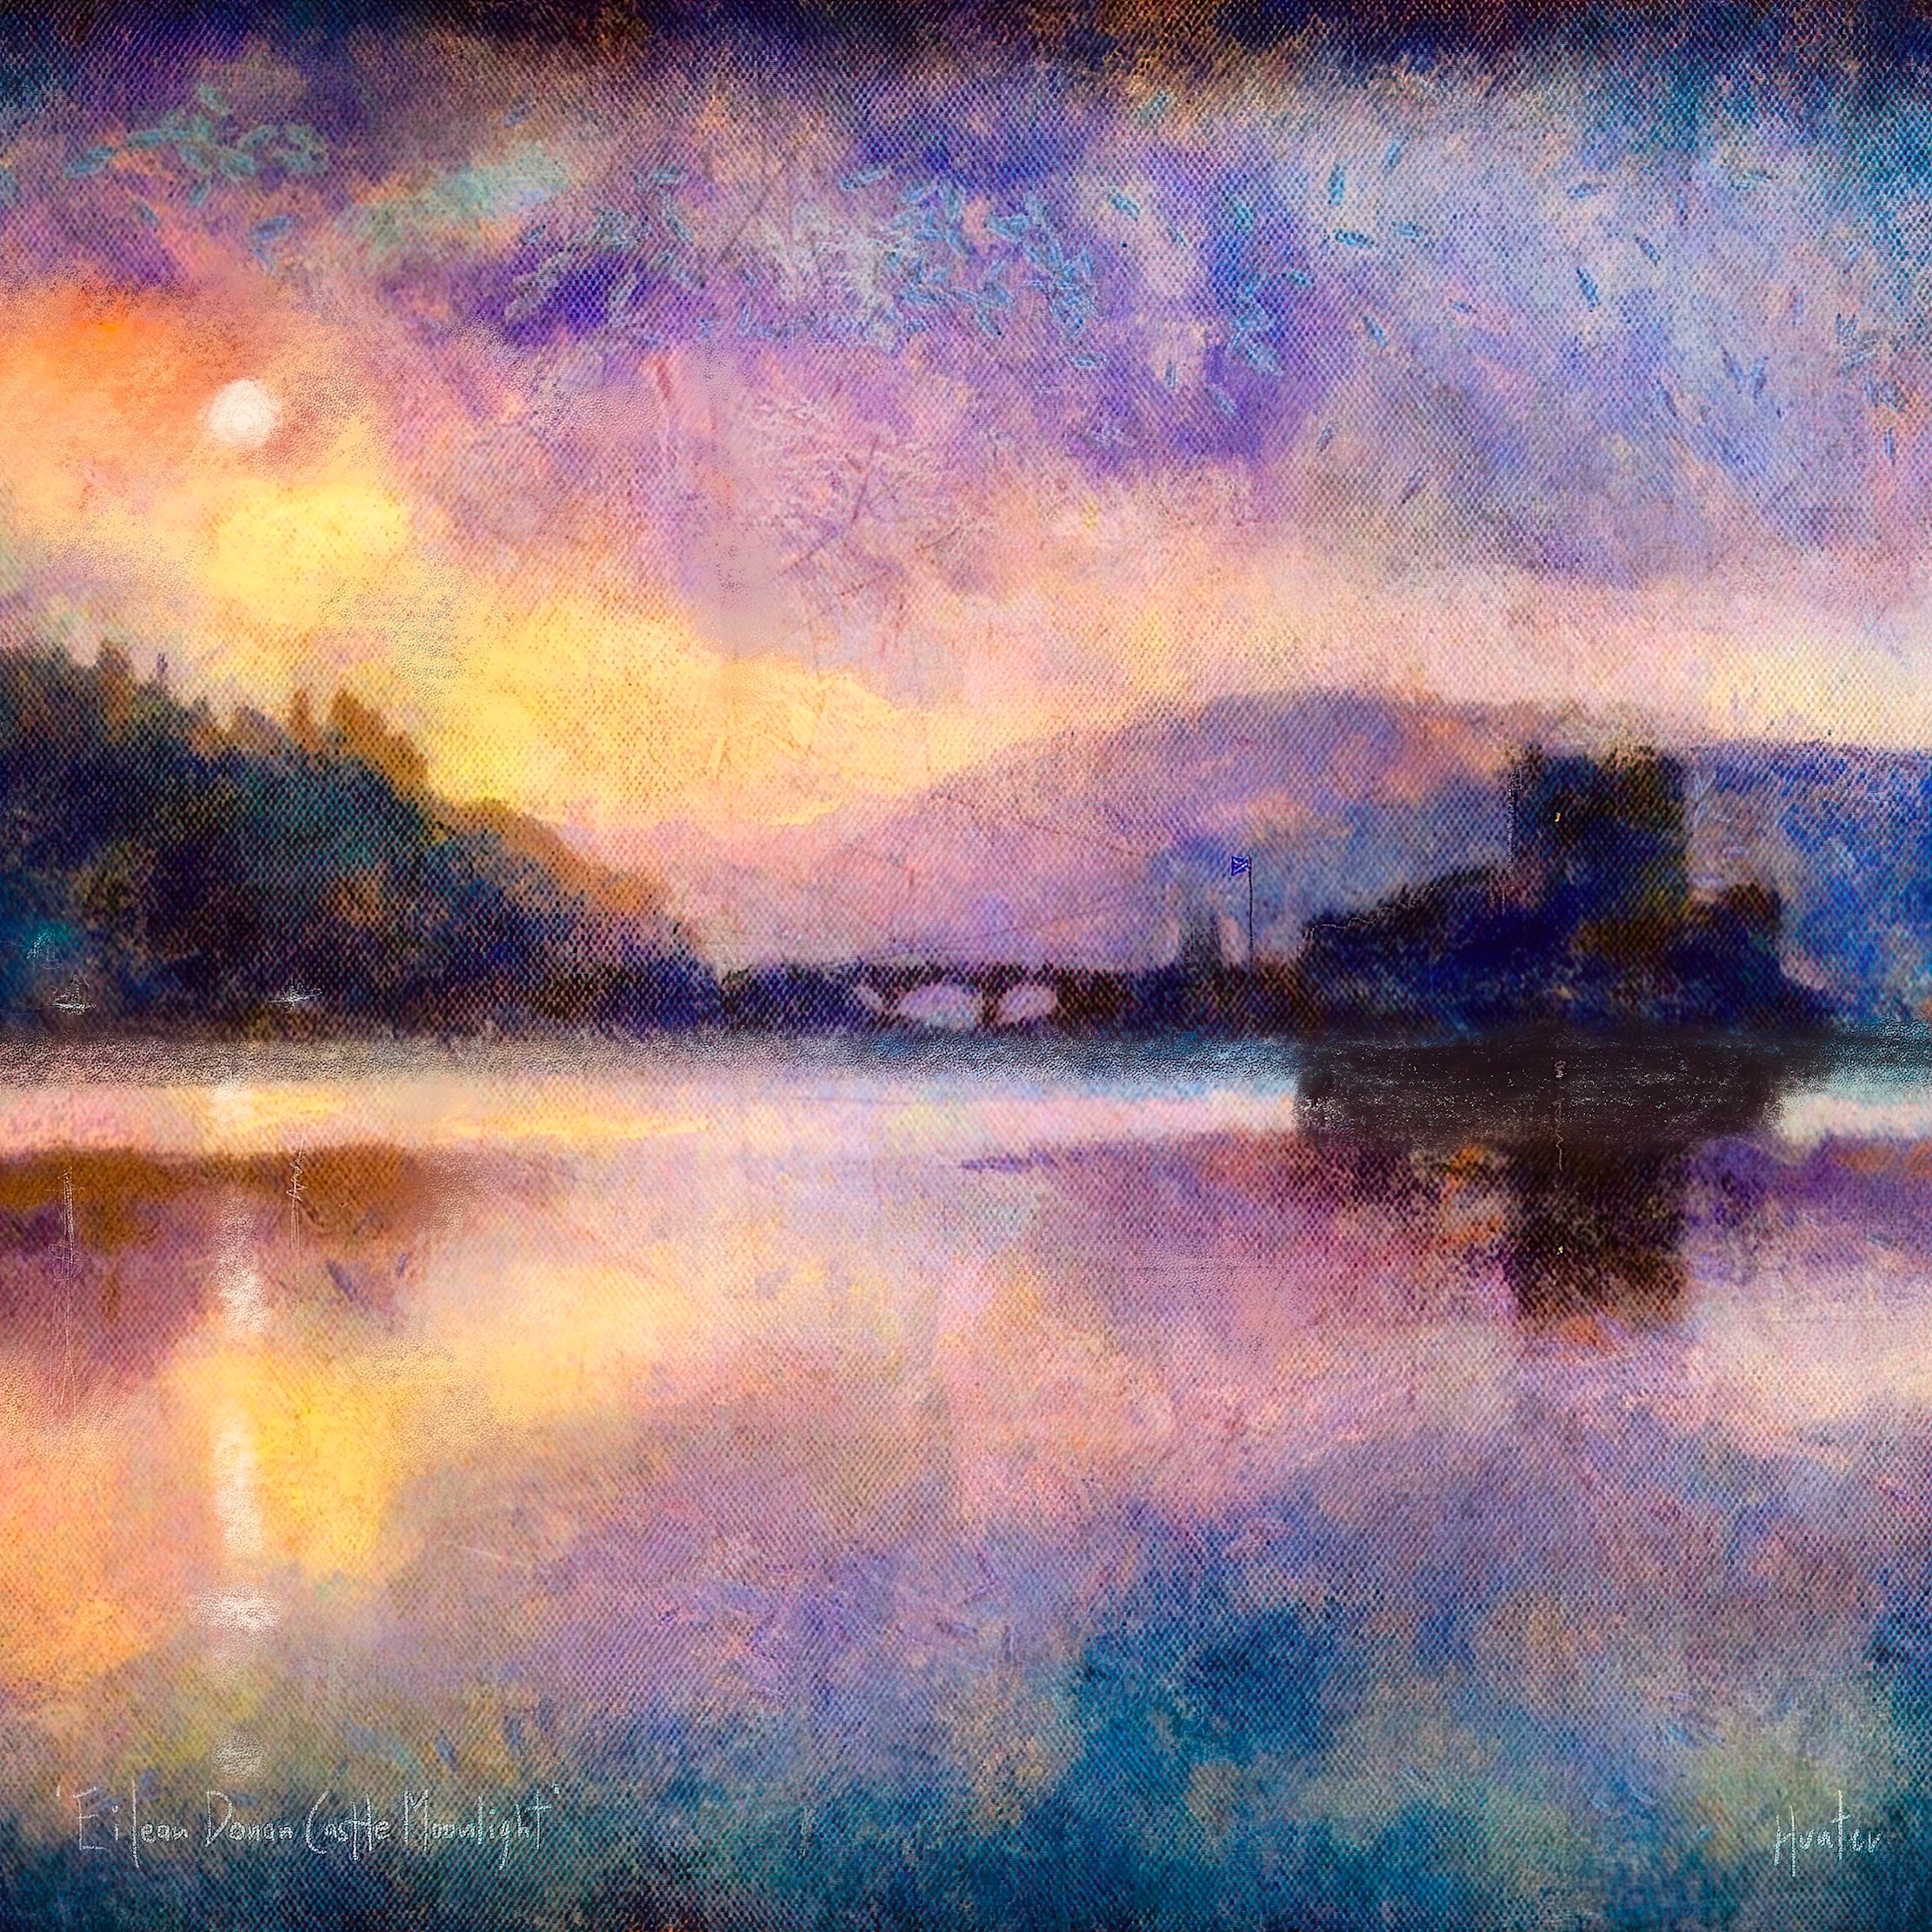 Eilean Donan Castle Moonlight | Scotland In Your Pocket Art Print-Scotland In Your Pocket Framed Prints-Historic & Iconic Scotland Art Gallery-Paintings, Prints, Homeware, Art Gifts From Scotland By Scottish Artist Kevin Hunter